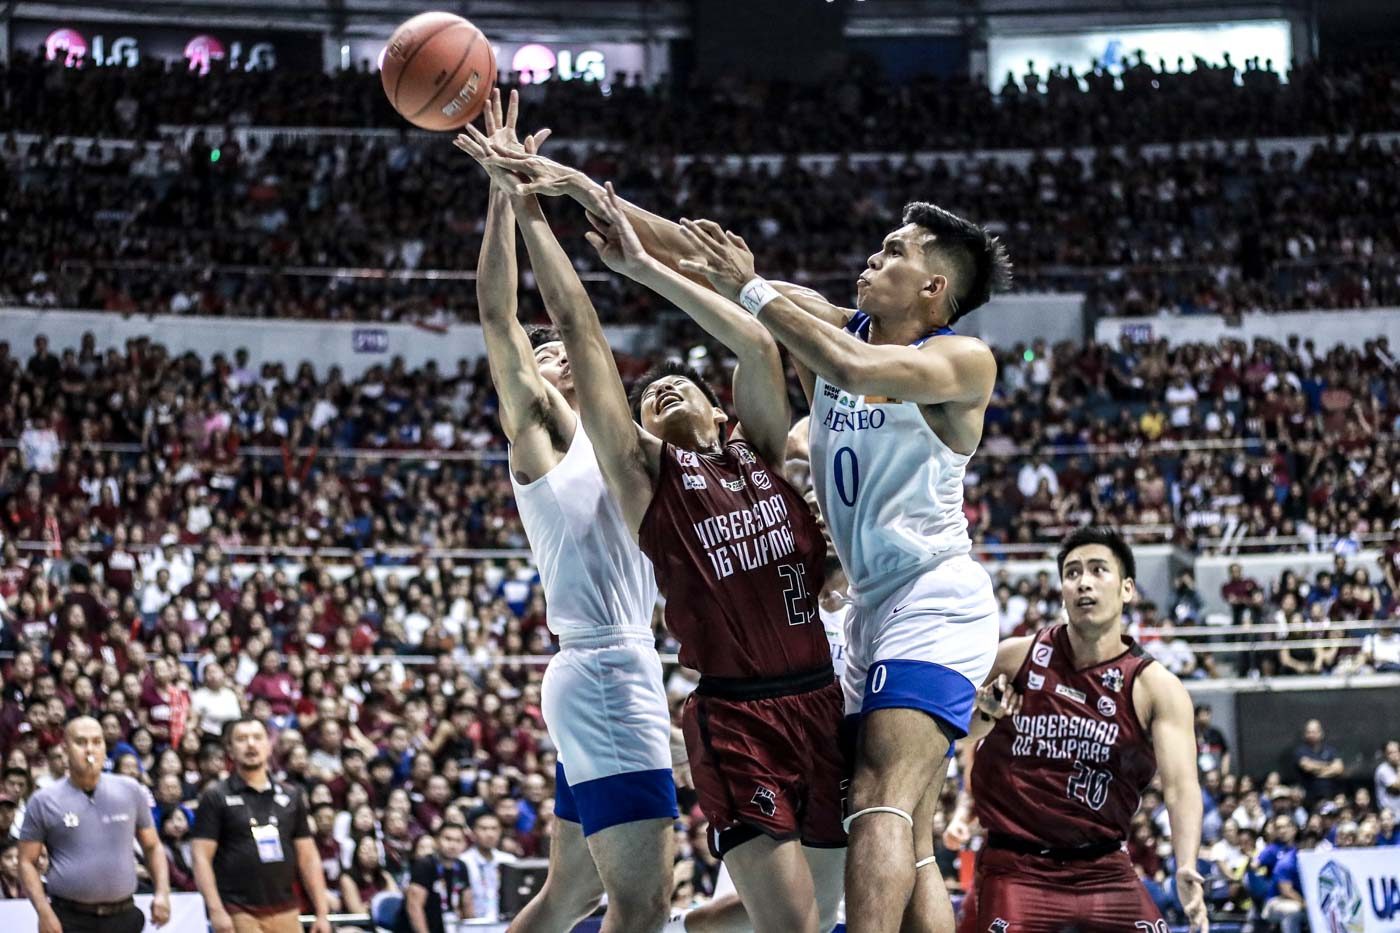 Ateneo reasserts mastery over UP, sweeps Season 82 1st round